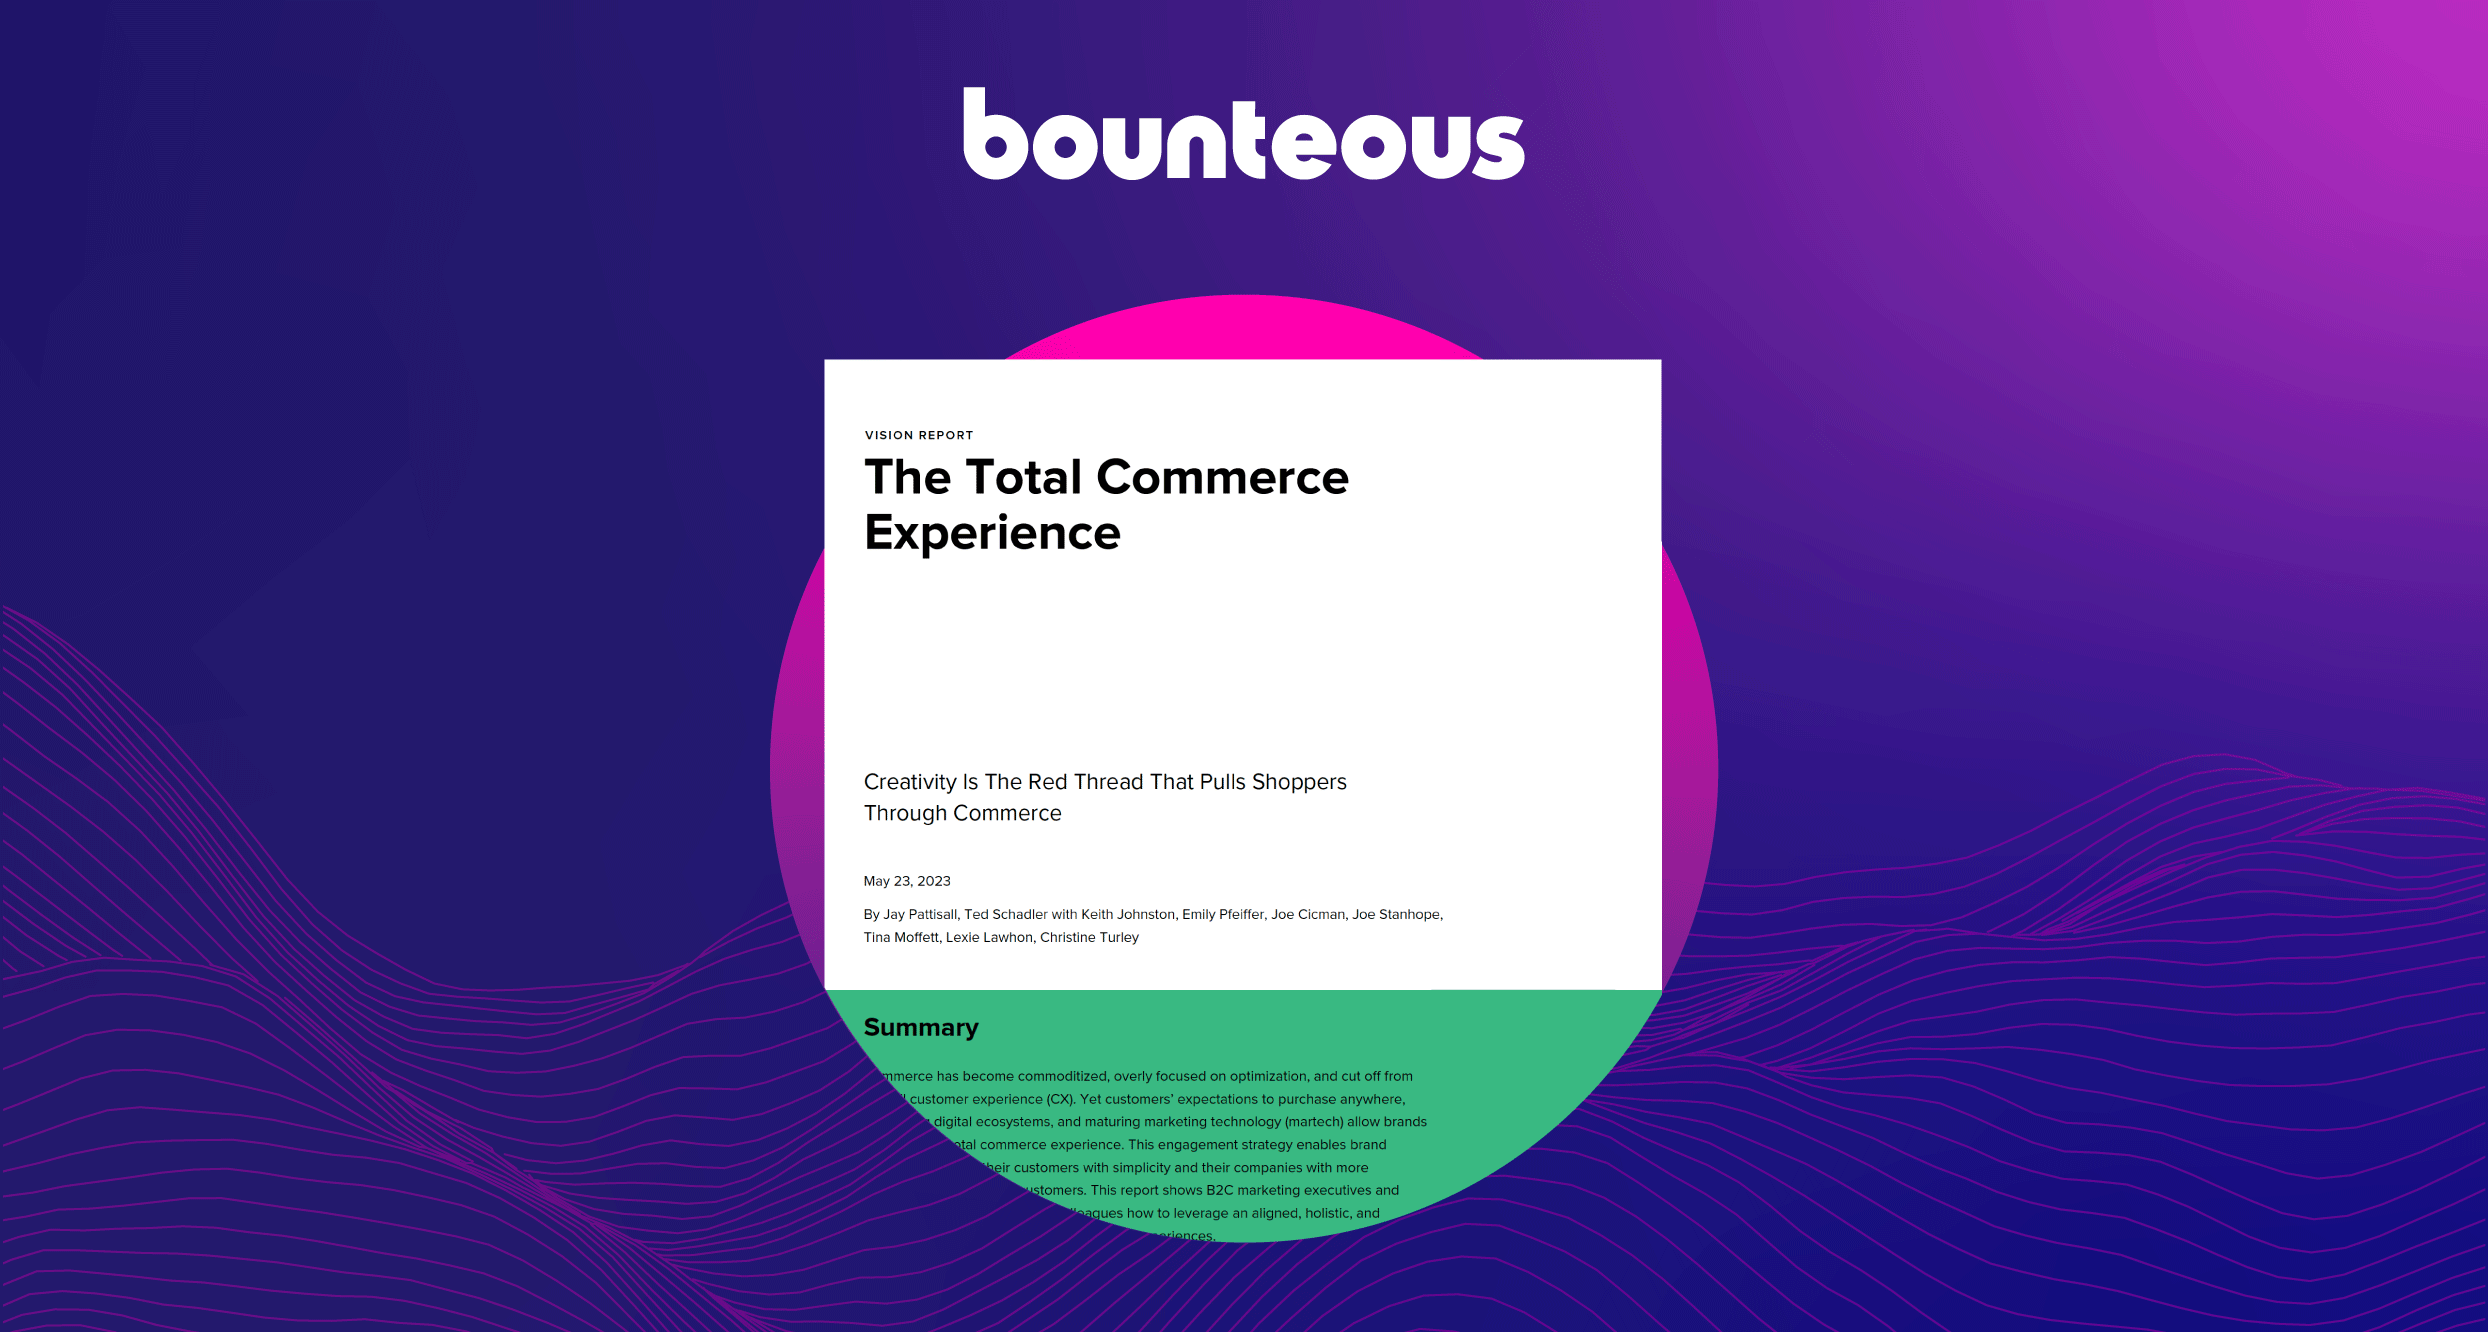 Press Release: Bounteous Recognized in Research Report, “The Total Commerce Experience”